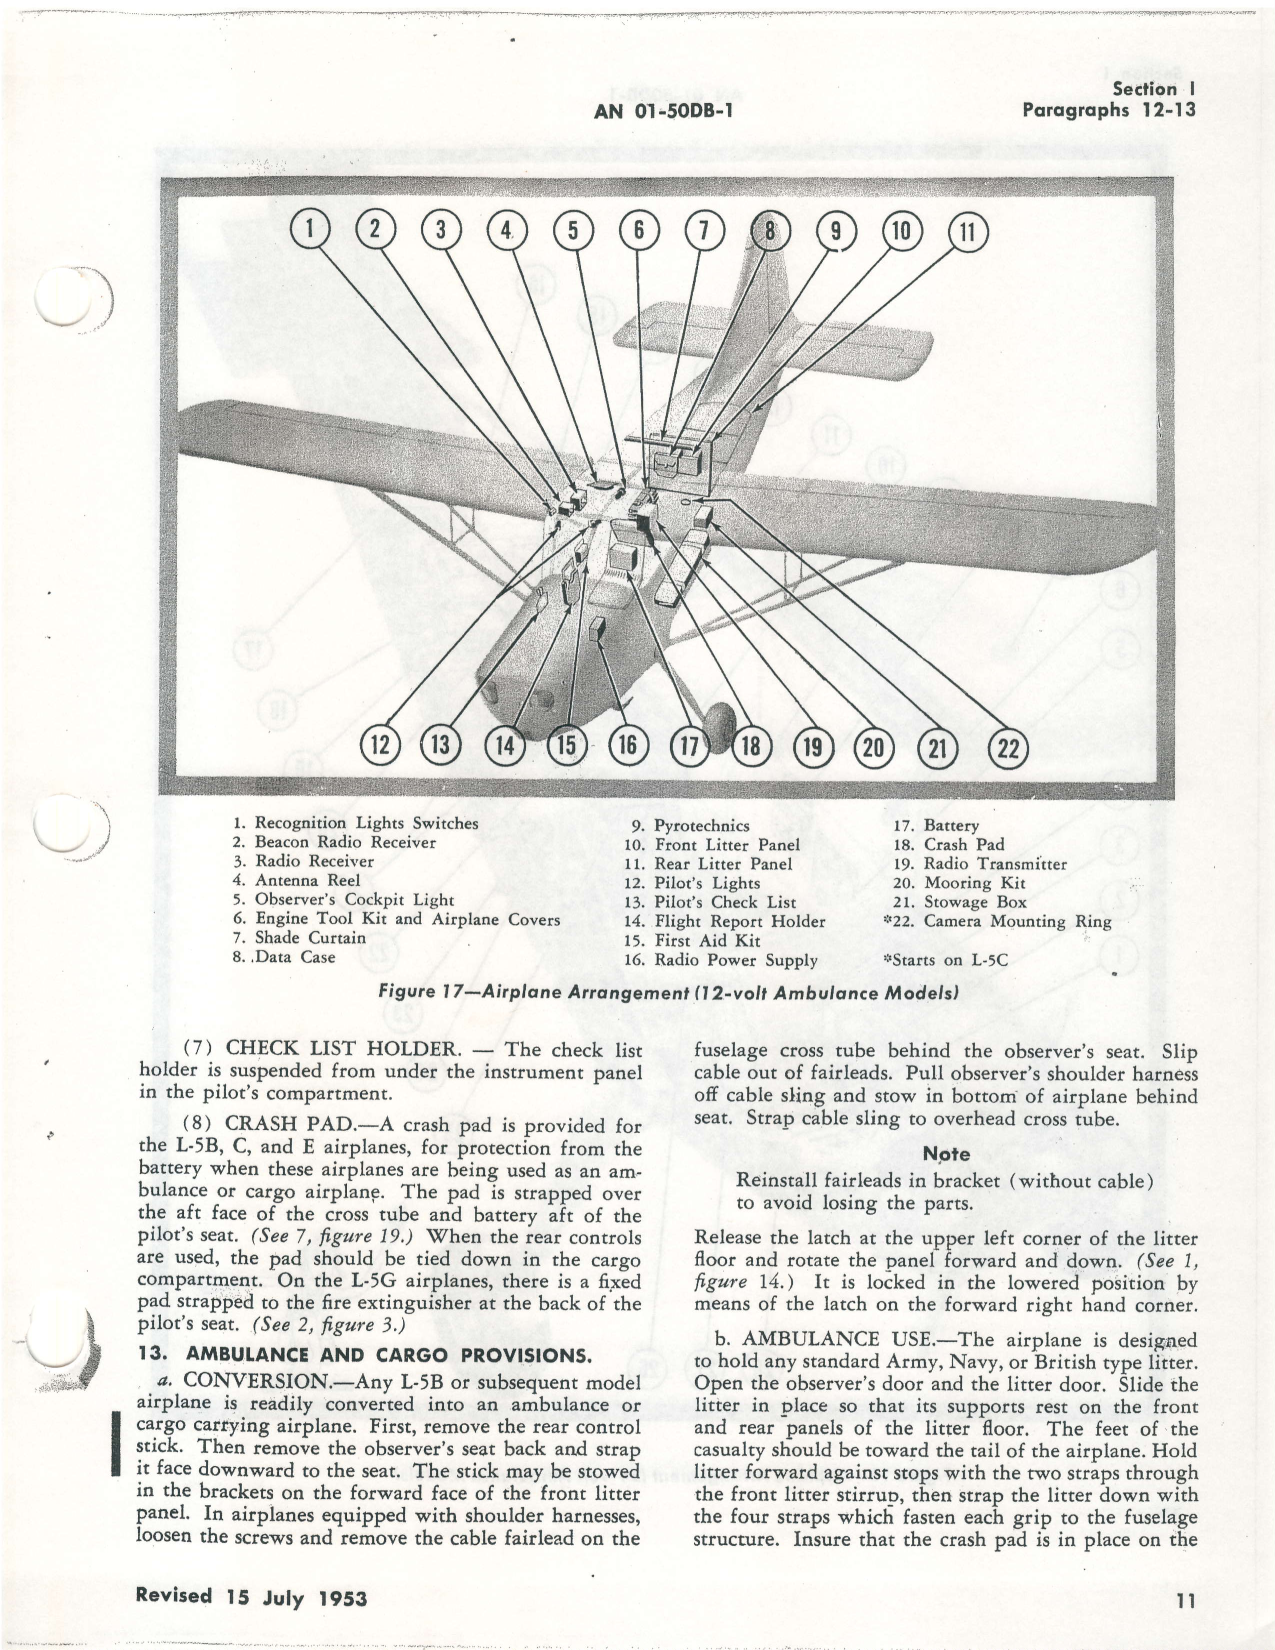 Sample page 17 from AirCorps Library document: Flight Handbook - L-5, OY-1, OY-2